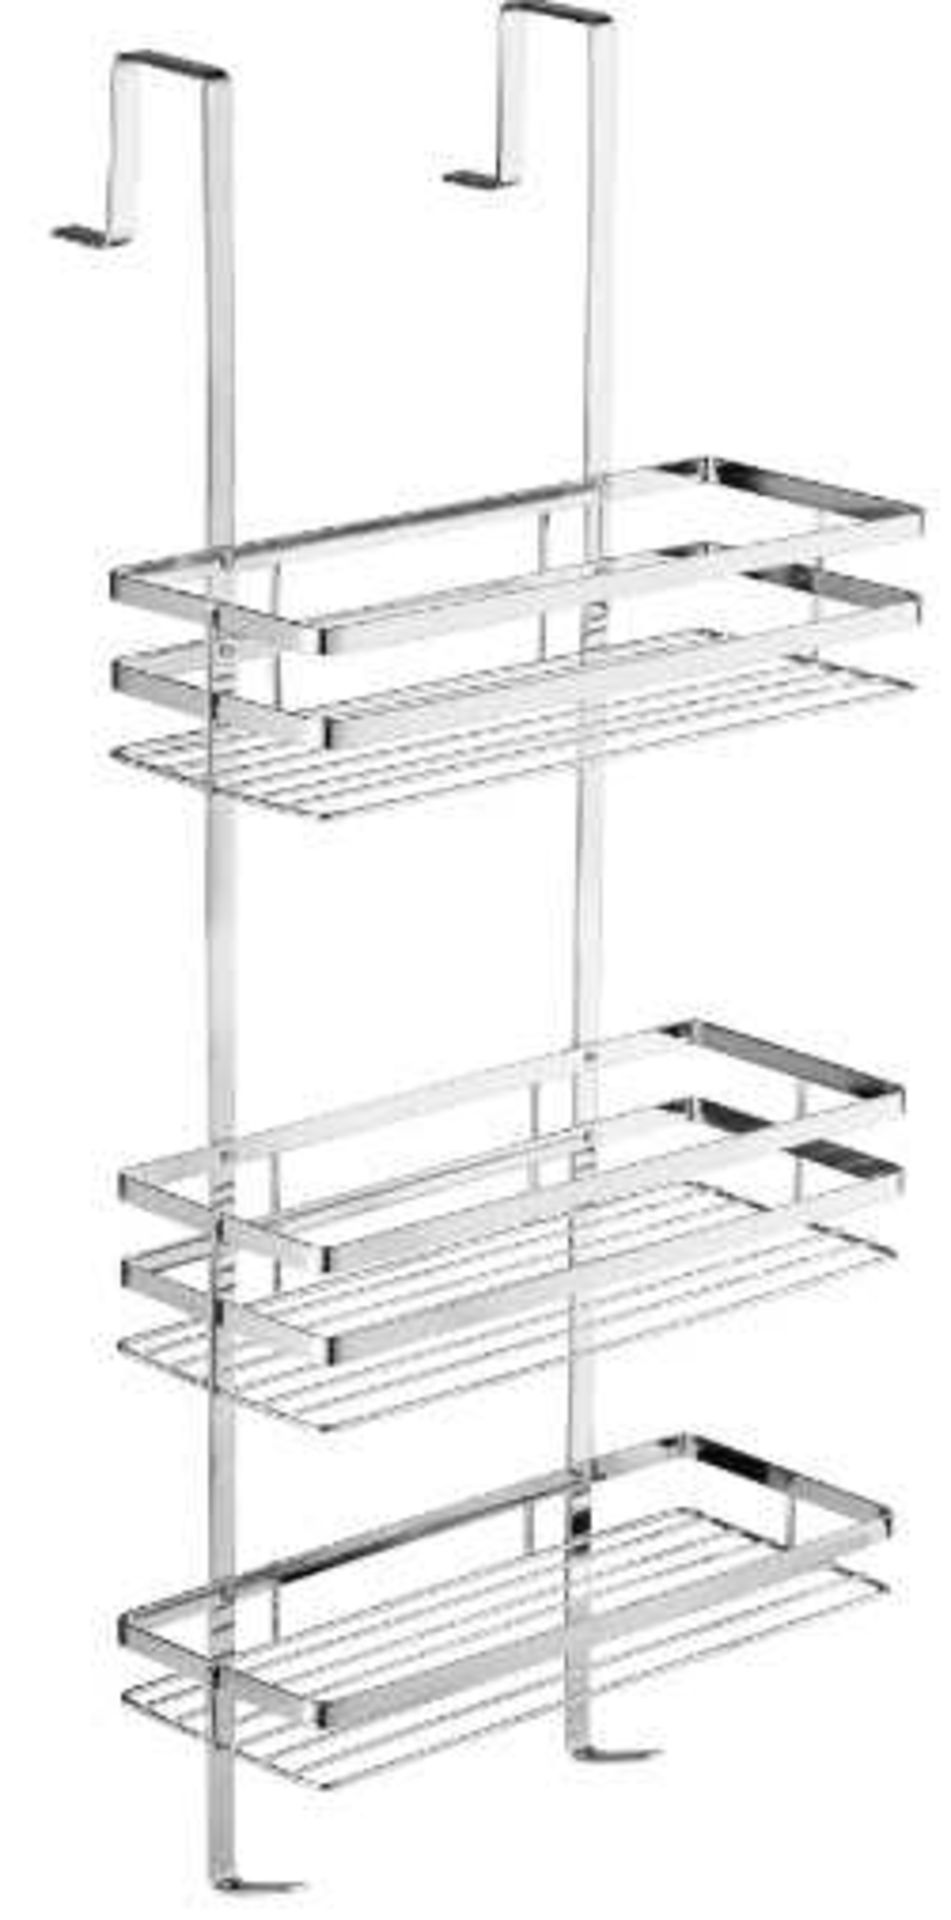 VAT Tectake - Shower Caddy Stainless Steel - Unchecked & Boxed. RRP œ33.99